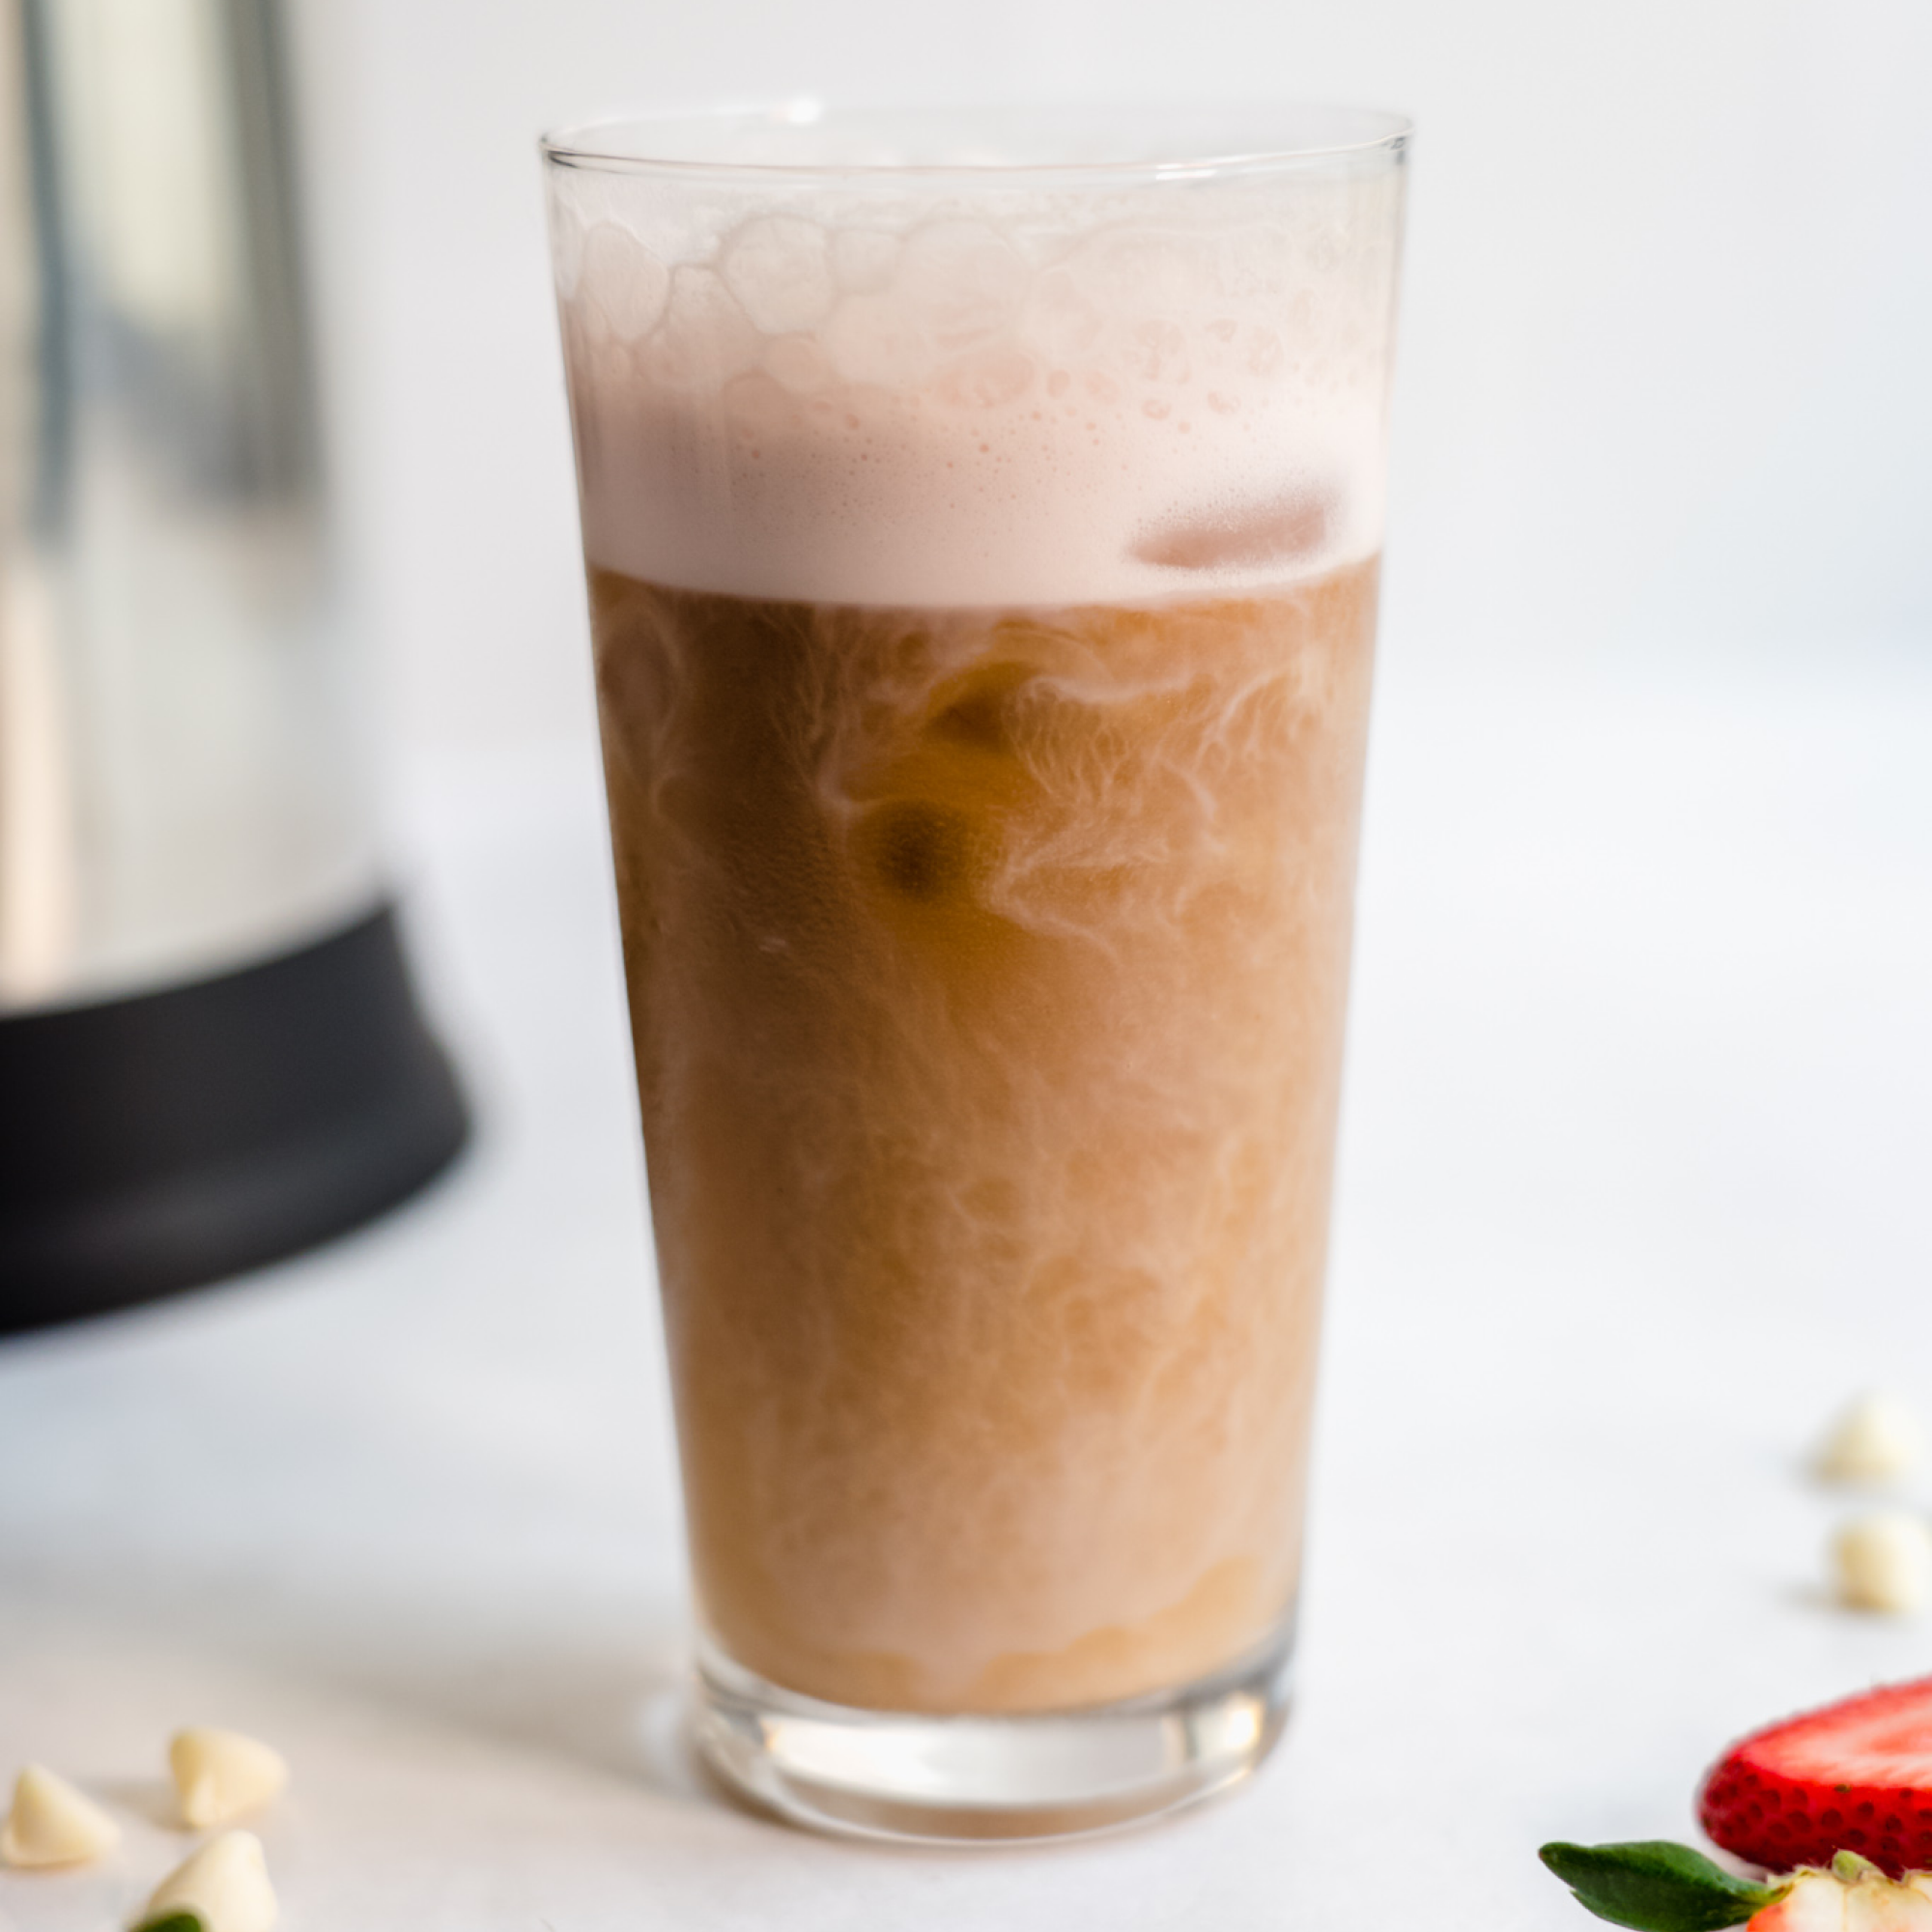 Delicious and refreshing Iced White Chocolate Strawberry Latte made using Almond Cow's almond milk machine